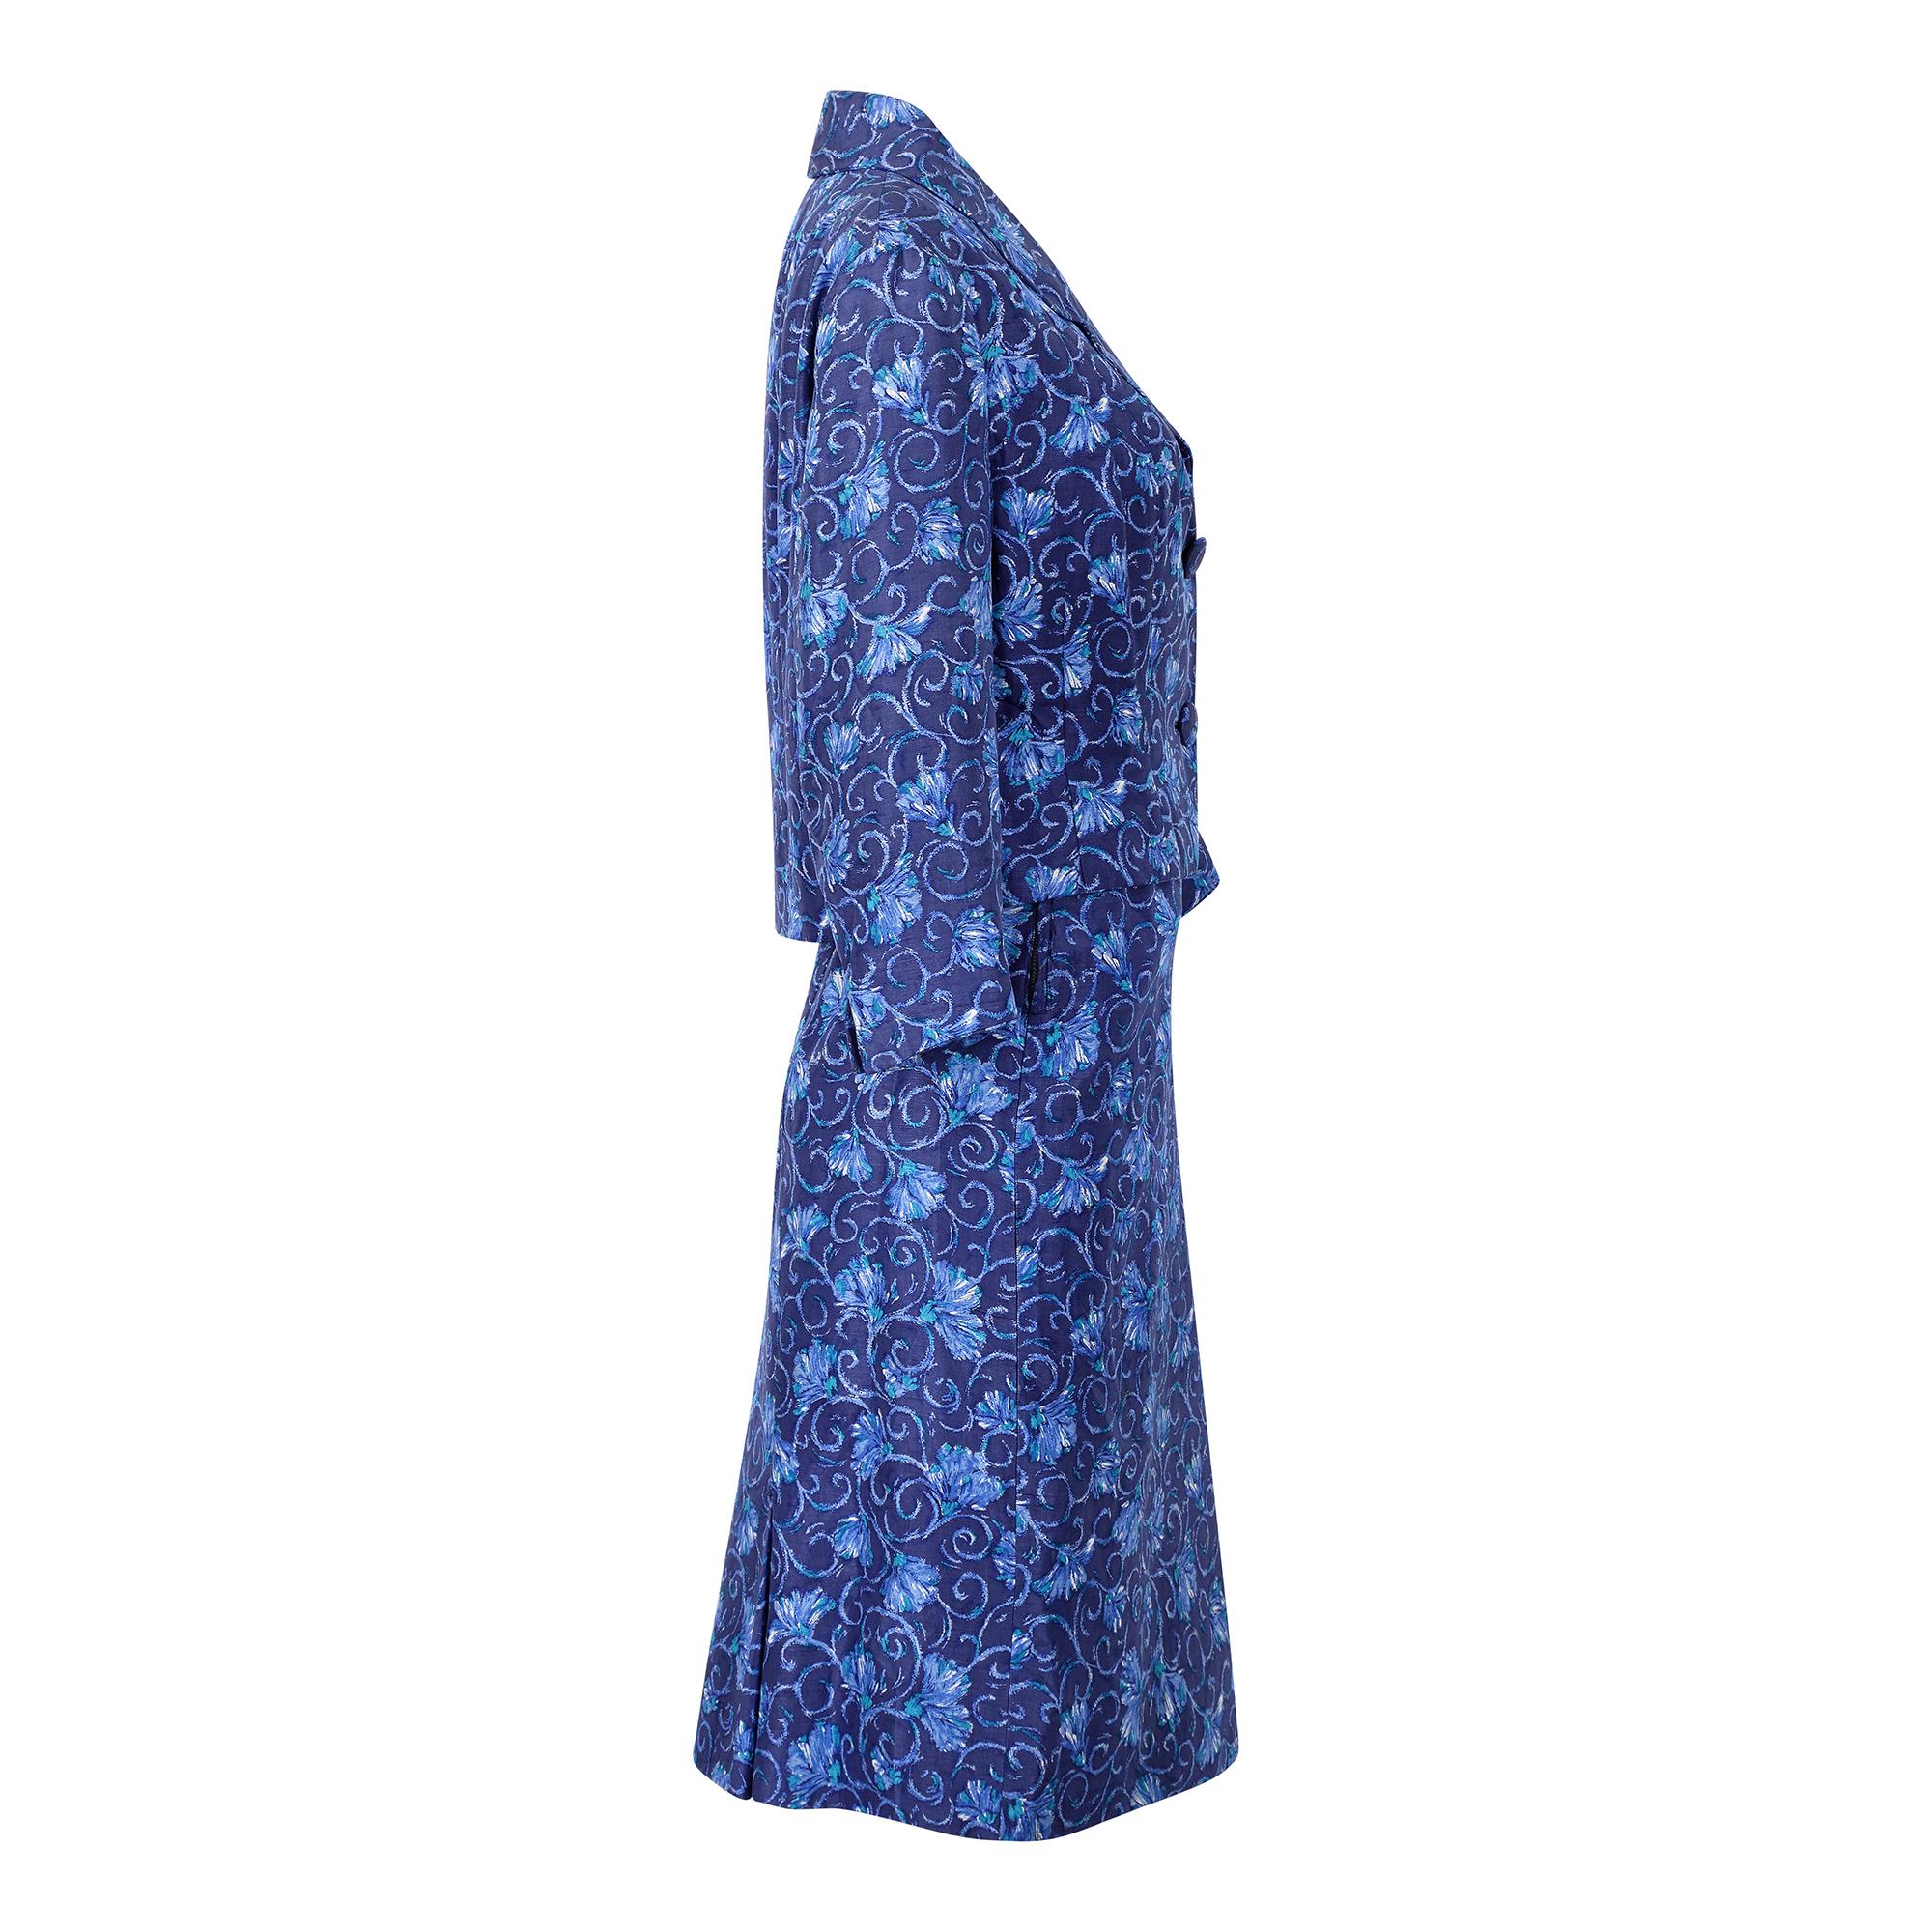 This original 1950s silk skirt suit is by royal couturier Hardy Amies, one of the best known names in British society fashion during the 50s and 60s. In a wonderful bright blue colour, the fabric showcases a scrolling floral repeat pattern that